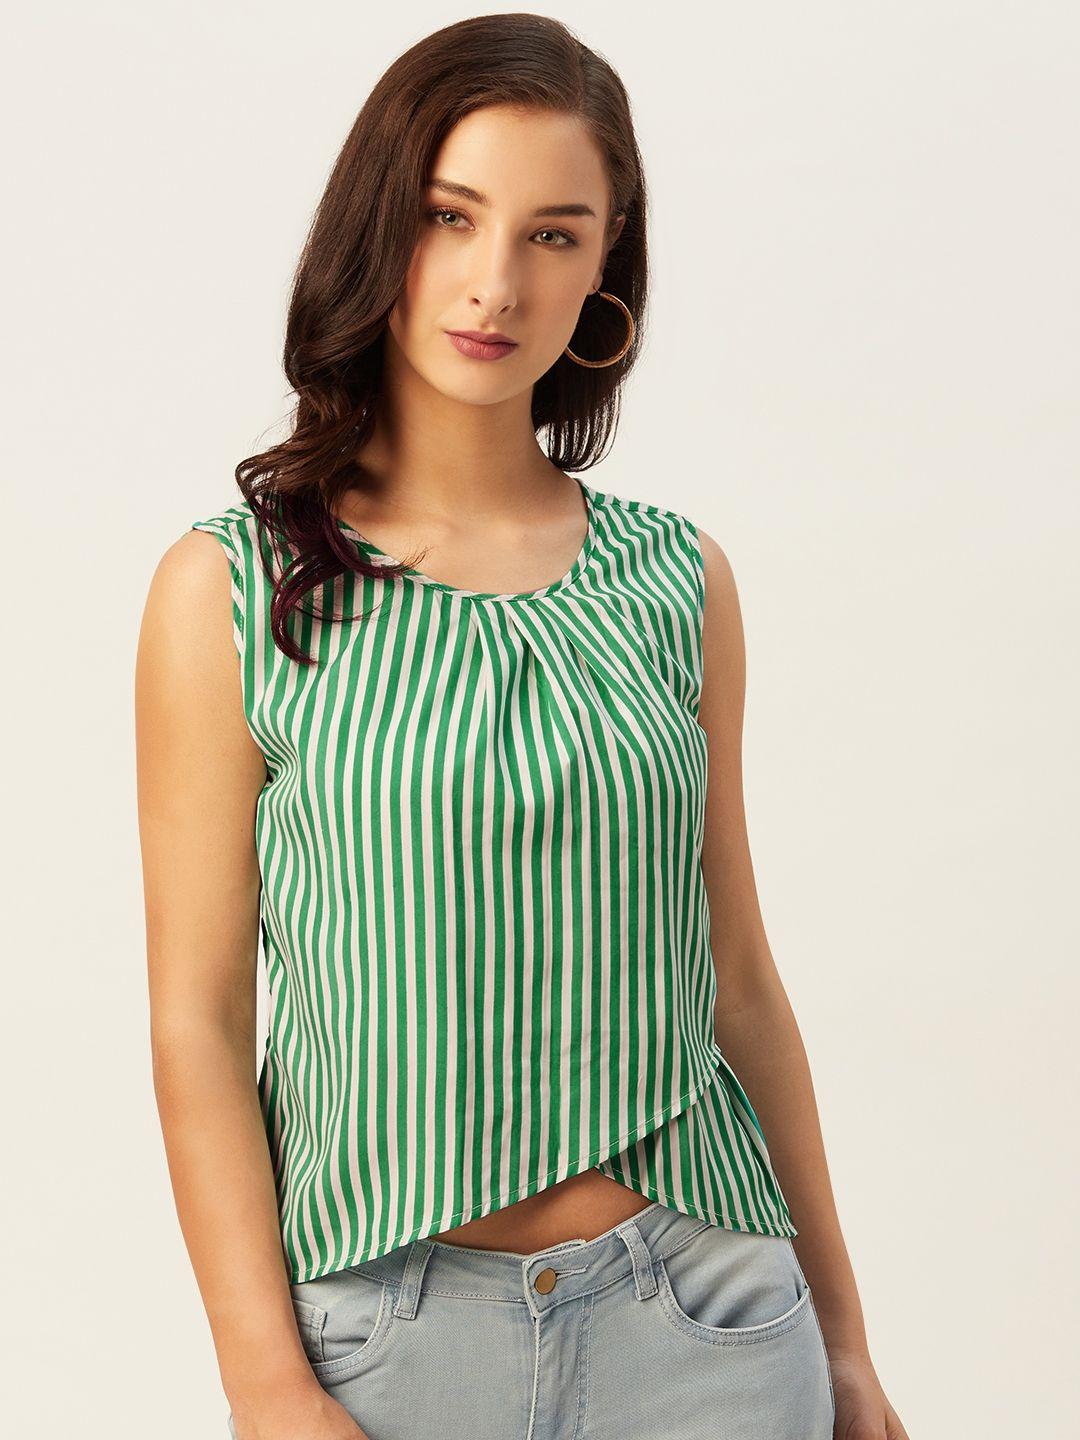 Belle Fille White & Green Striped High Low Crop Top